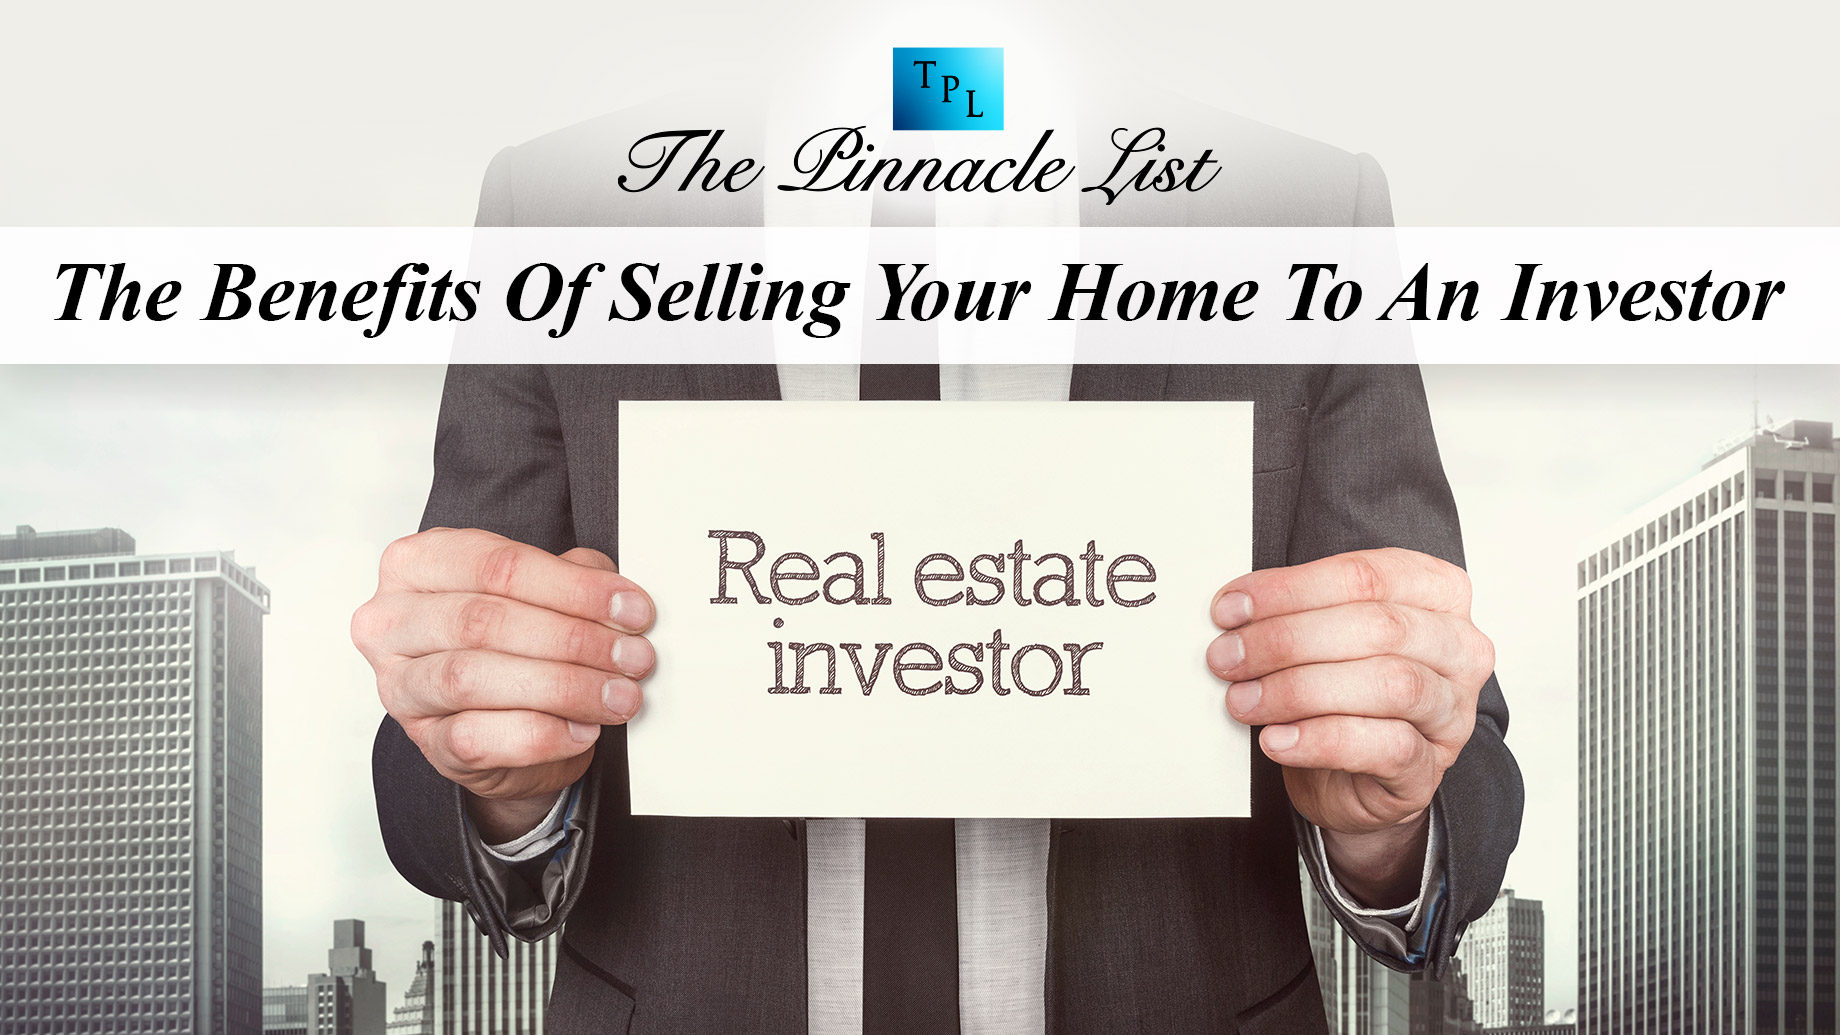 The Benefits Of Selling Your Home To An Investor